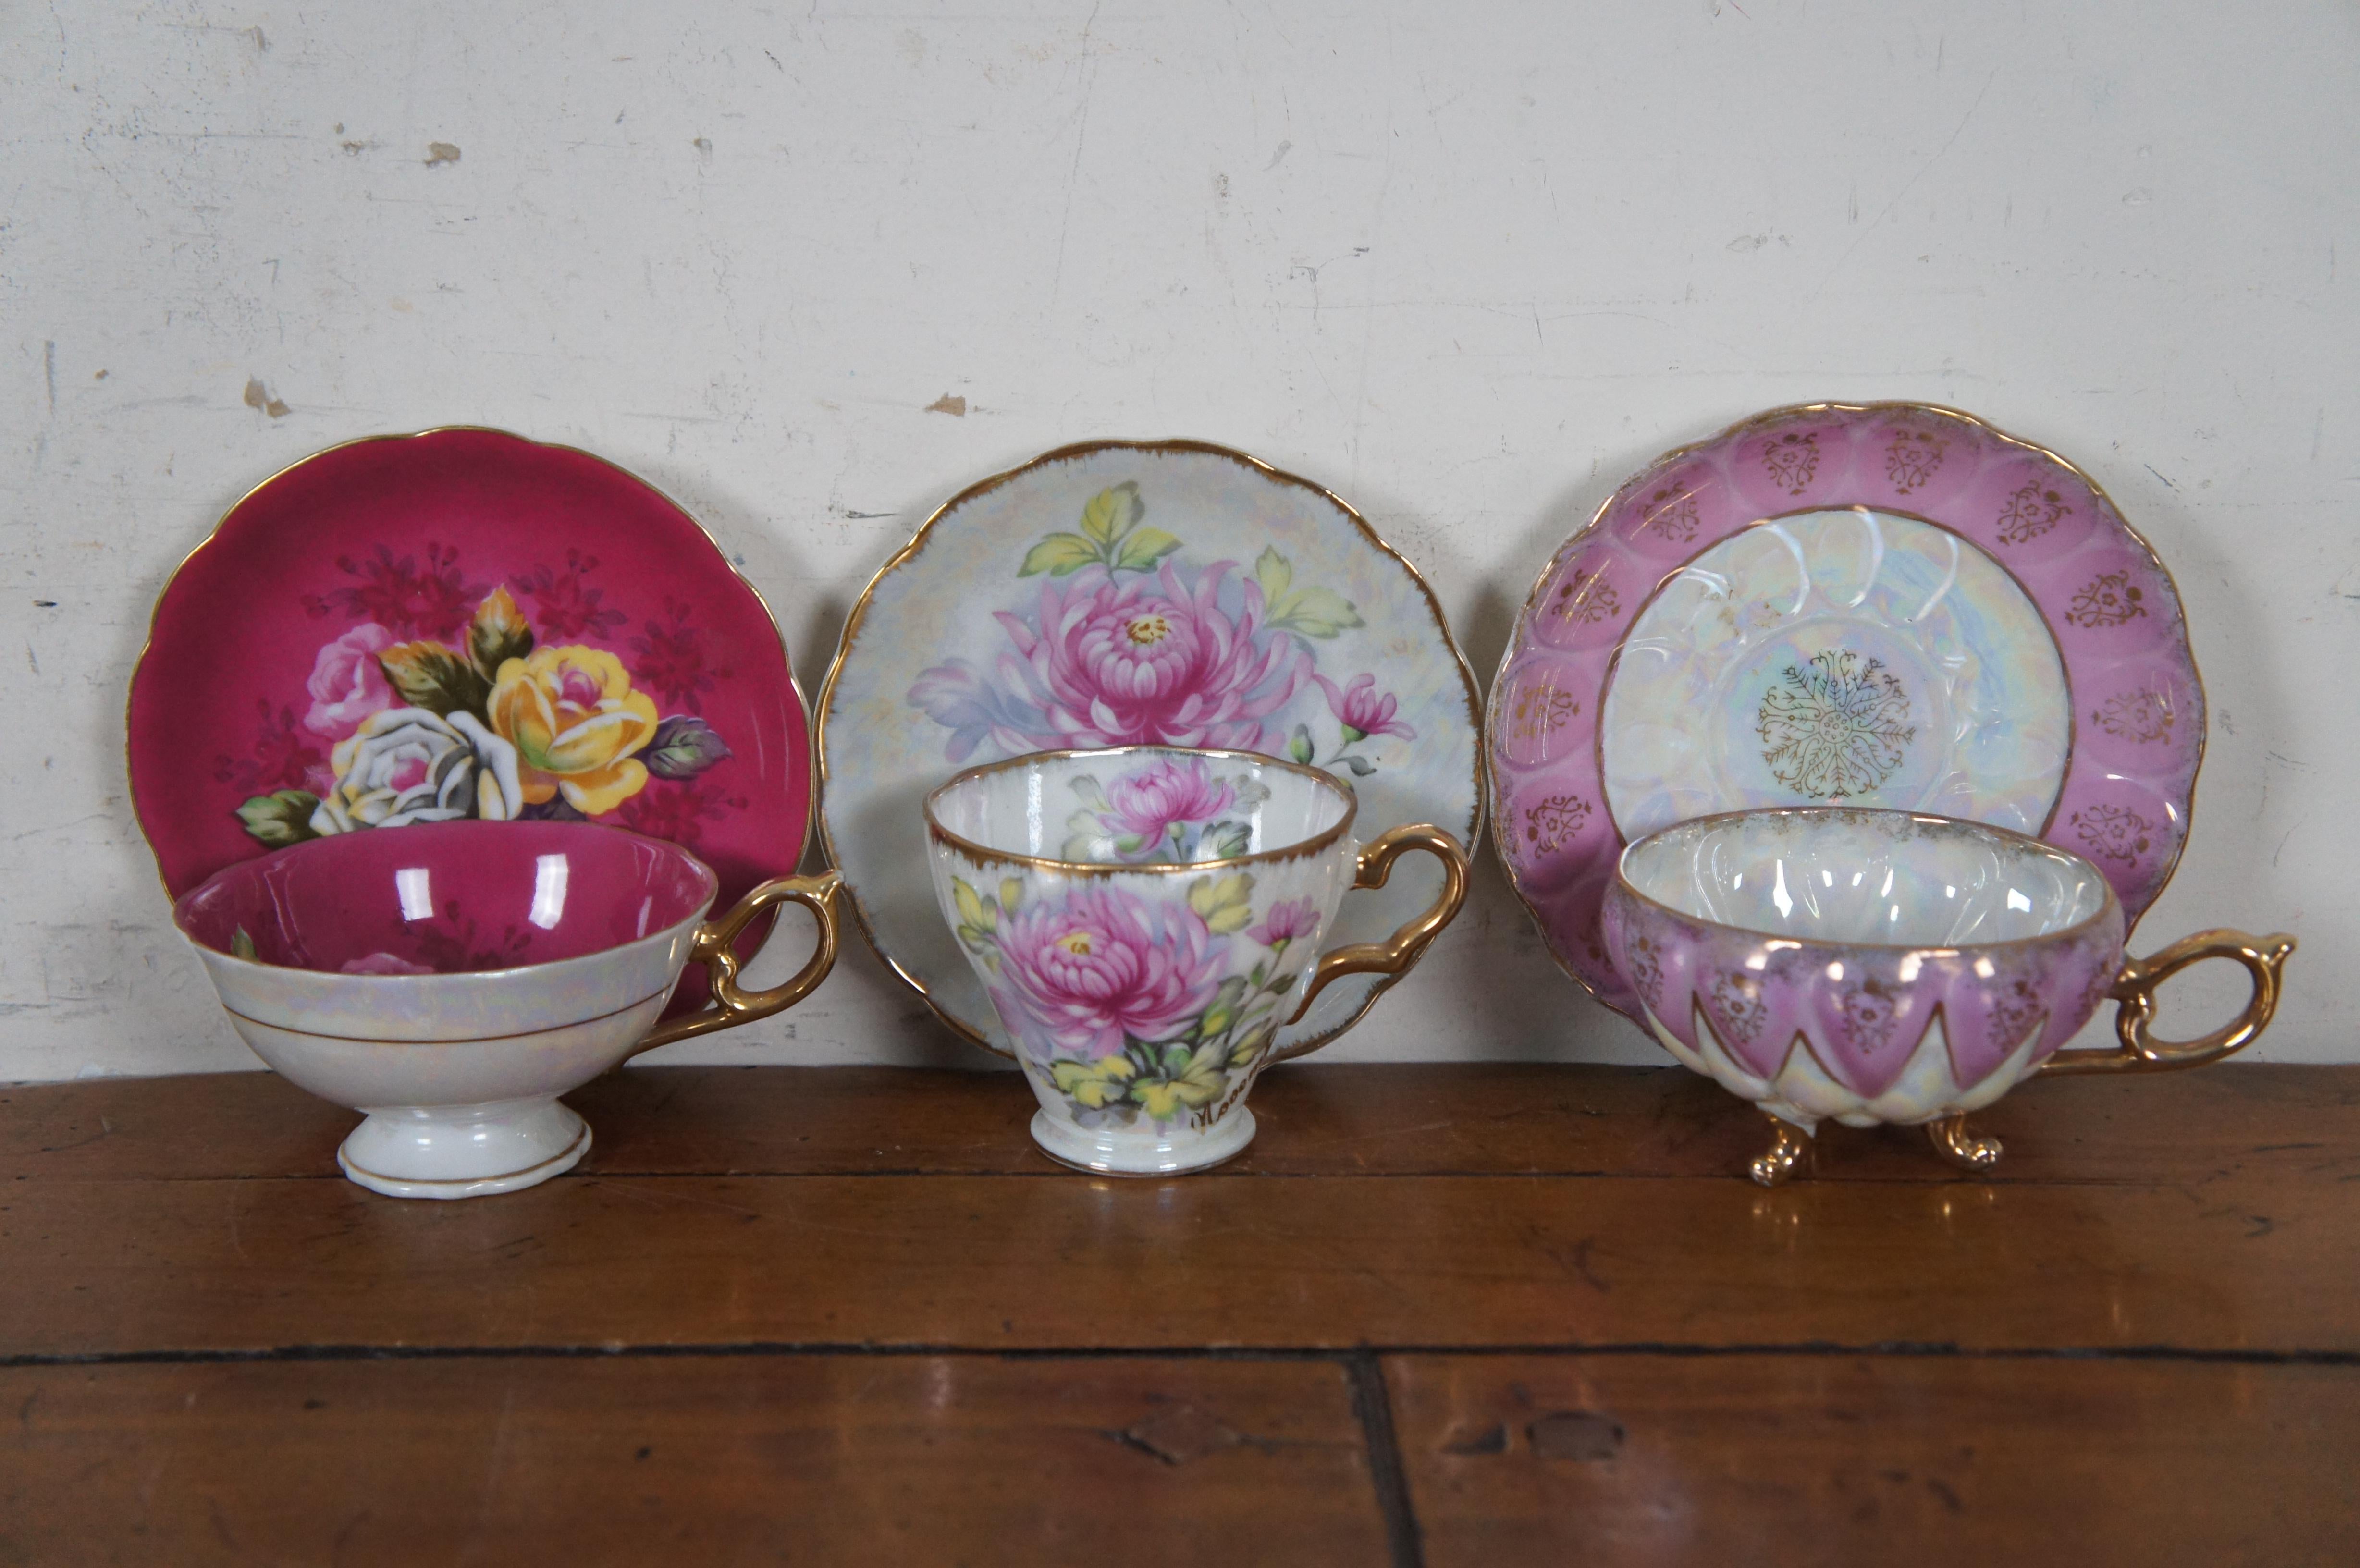 20th Century Lot of 9 Antique & Vintage Porcelain Teacups & Saucers Hand Painted Reticulated